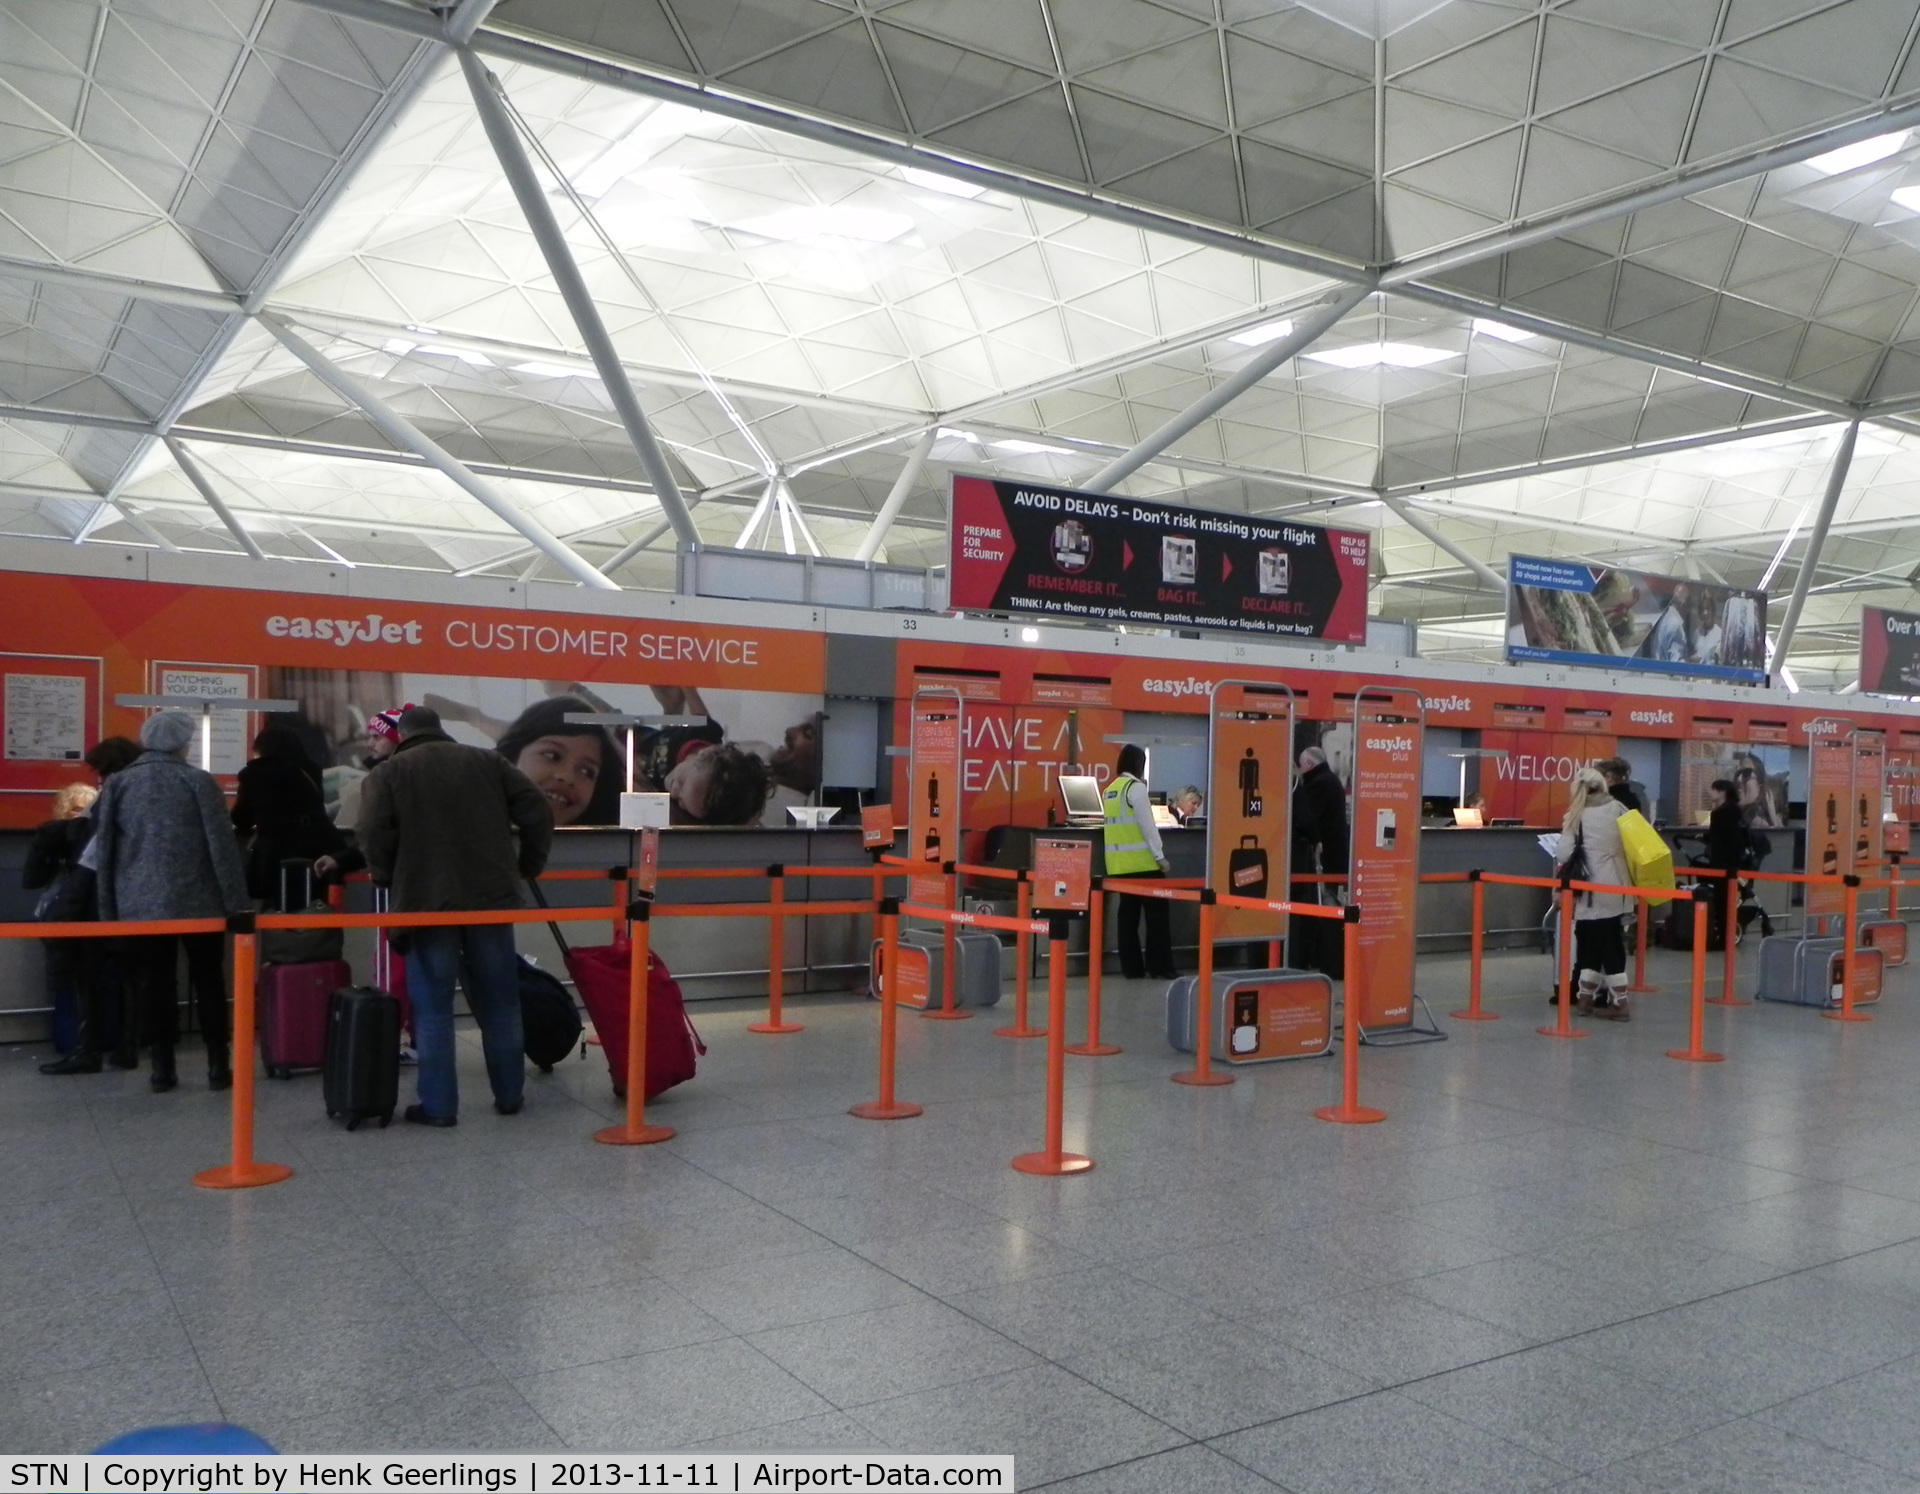 London Stansted Airport, London, England United Kingdom (STN) - Check in for EasyJet